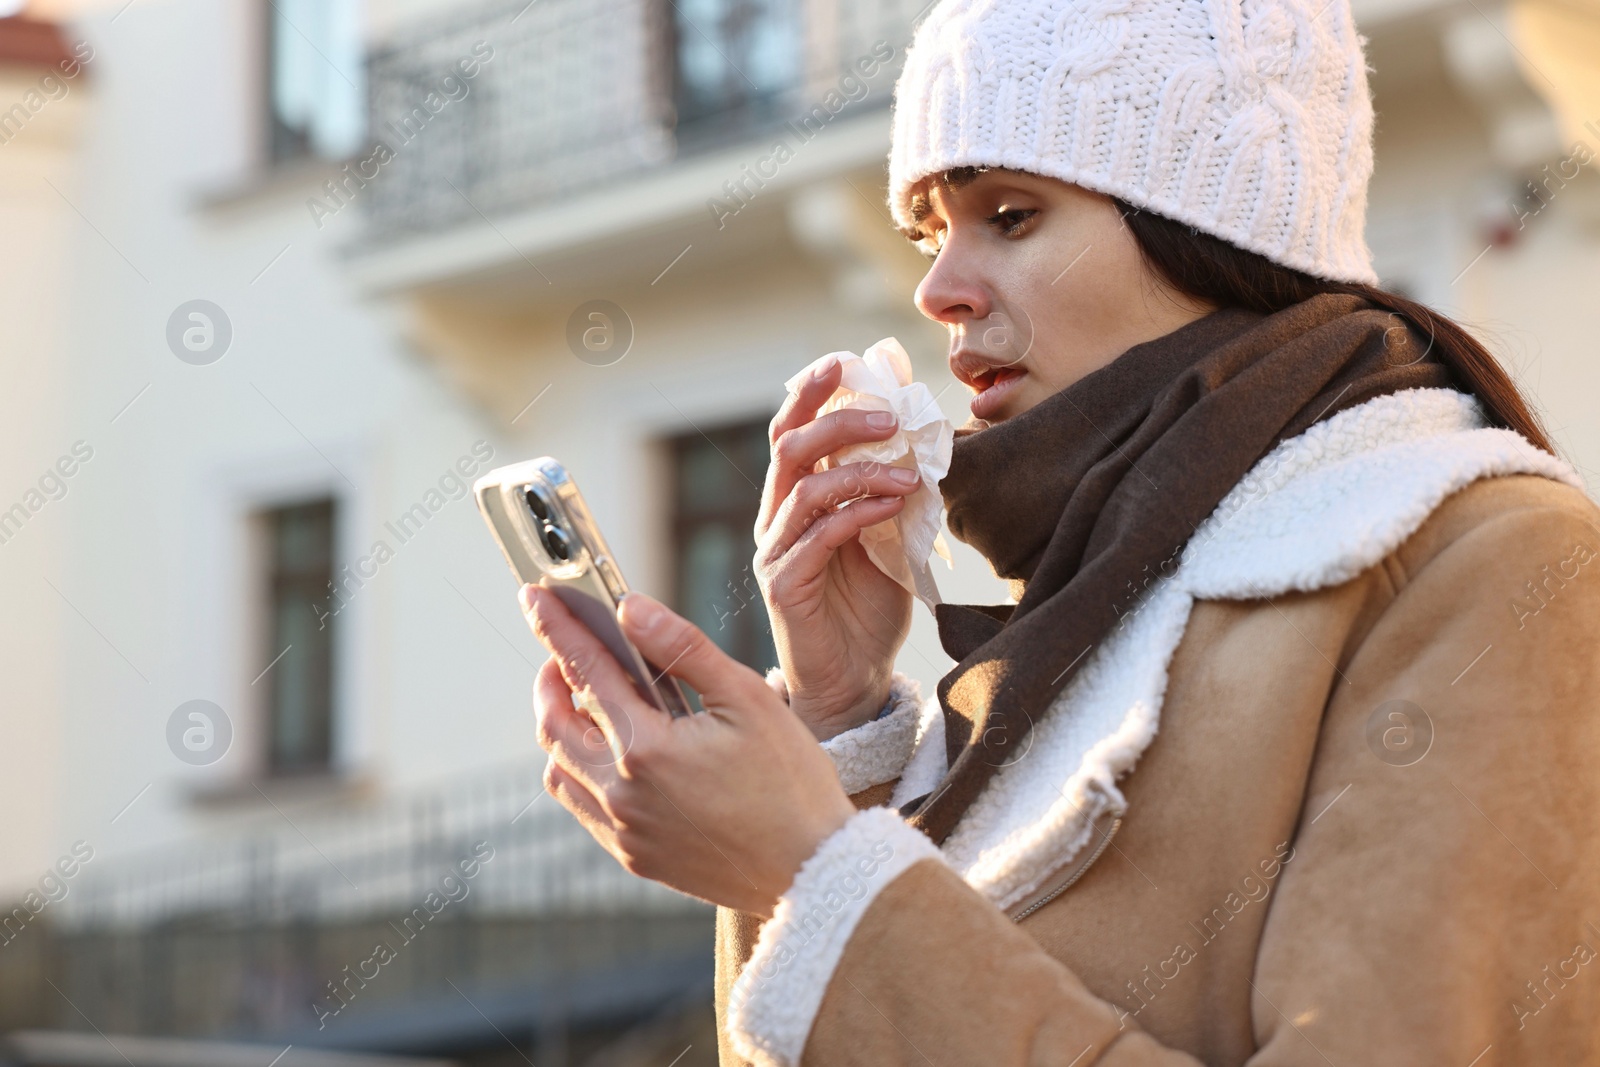 Photo of Woman with tissue blowing runny nose while using phone outdoors. Cold symptom